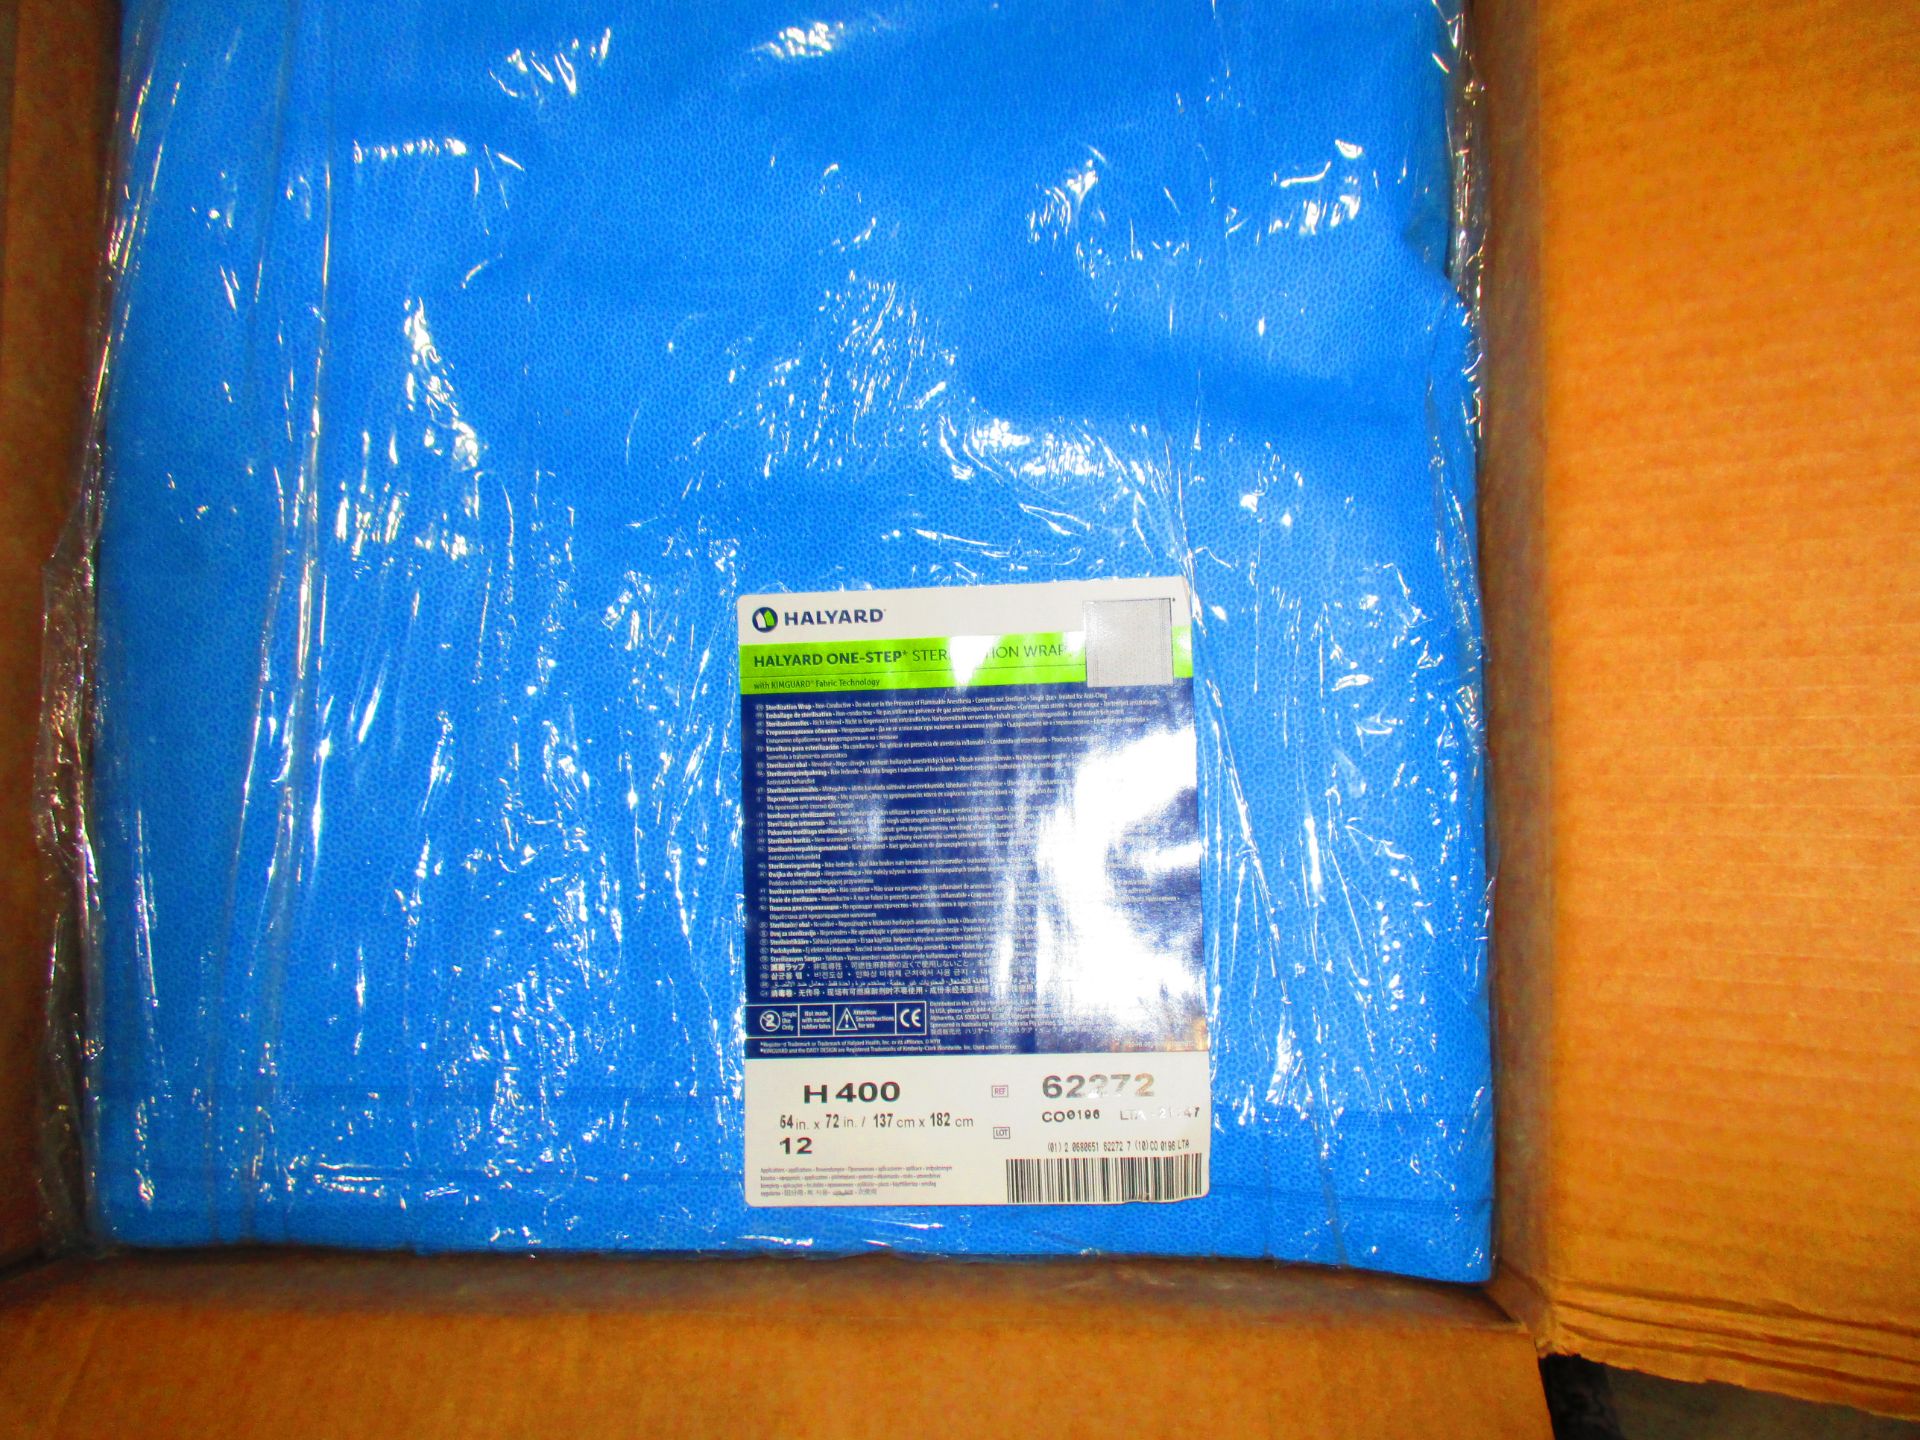 HALYARD One-Step Sterilization Wrap, 54 X 72, Ref# 6227203, 305 CASES ON 5 PALLETS, 24 EA/CS - Image 3 of 3